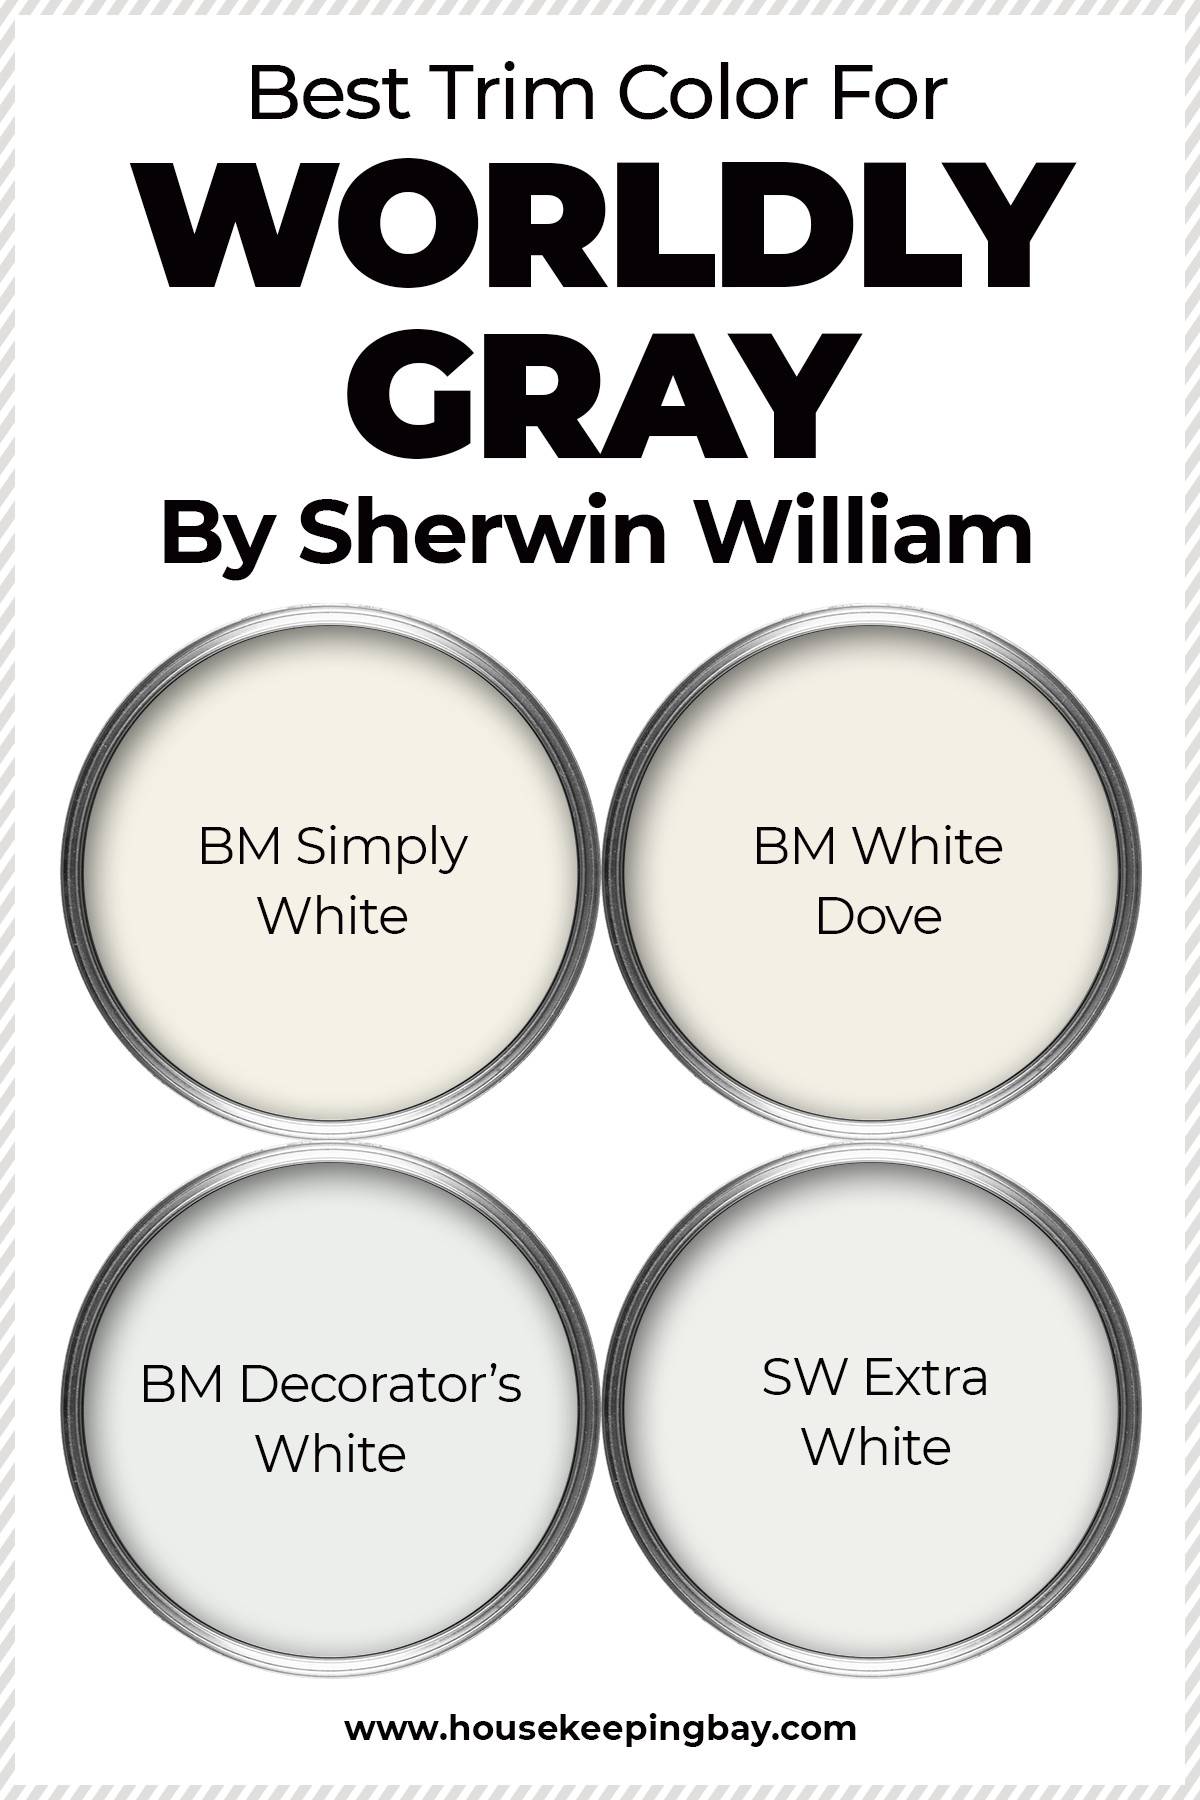 Best Trim Color For Worldly Gray